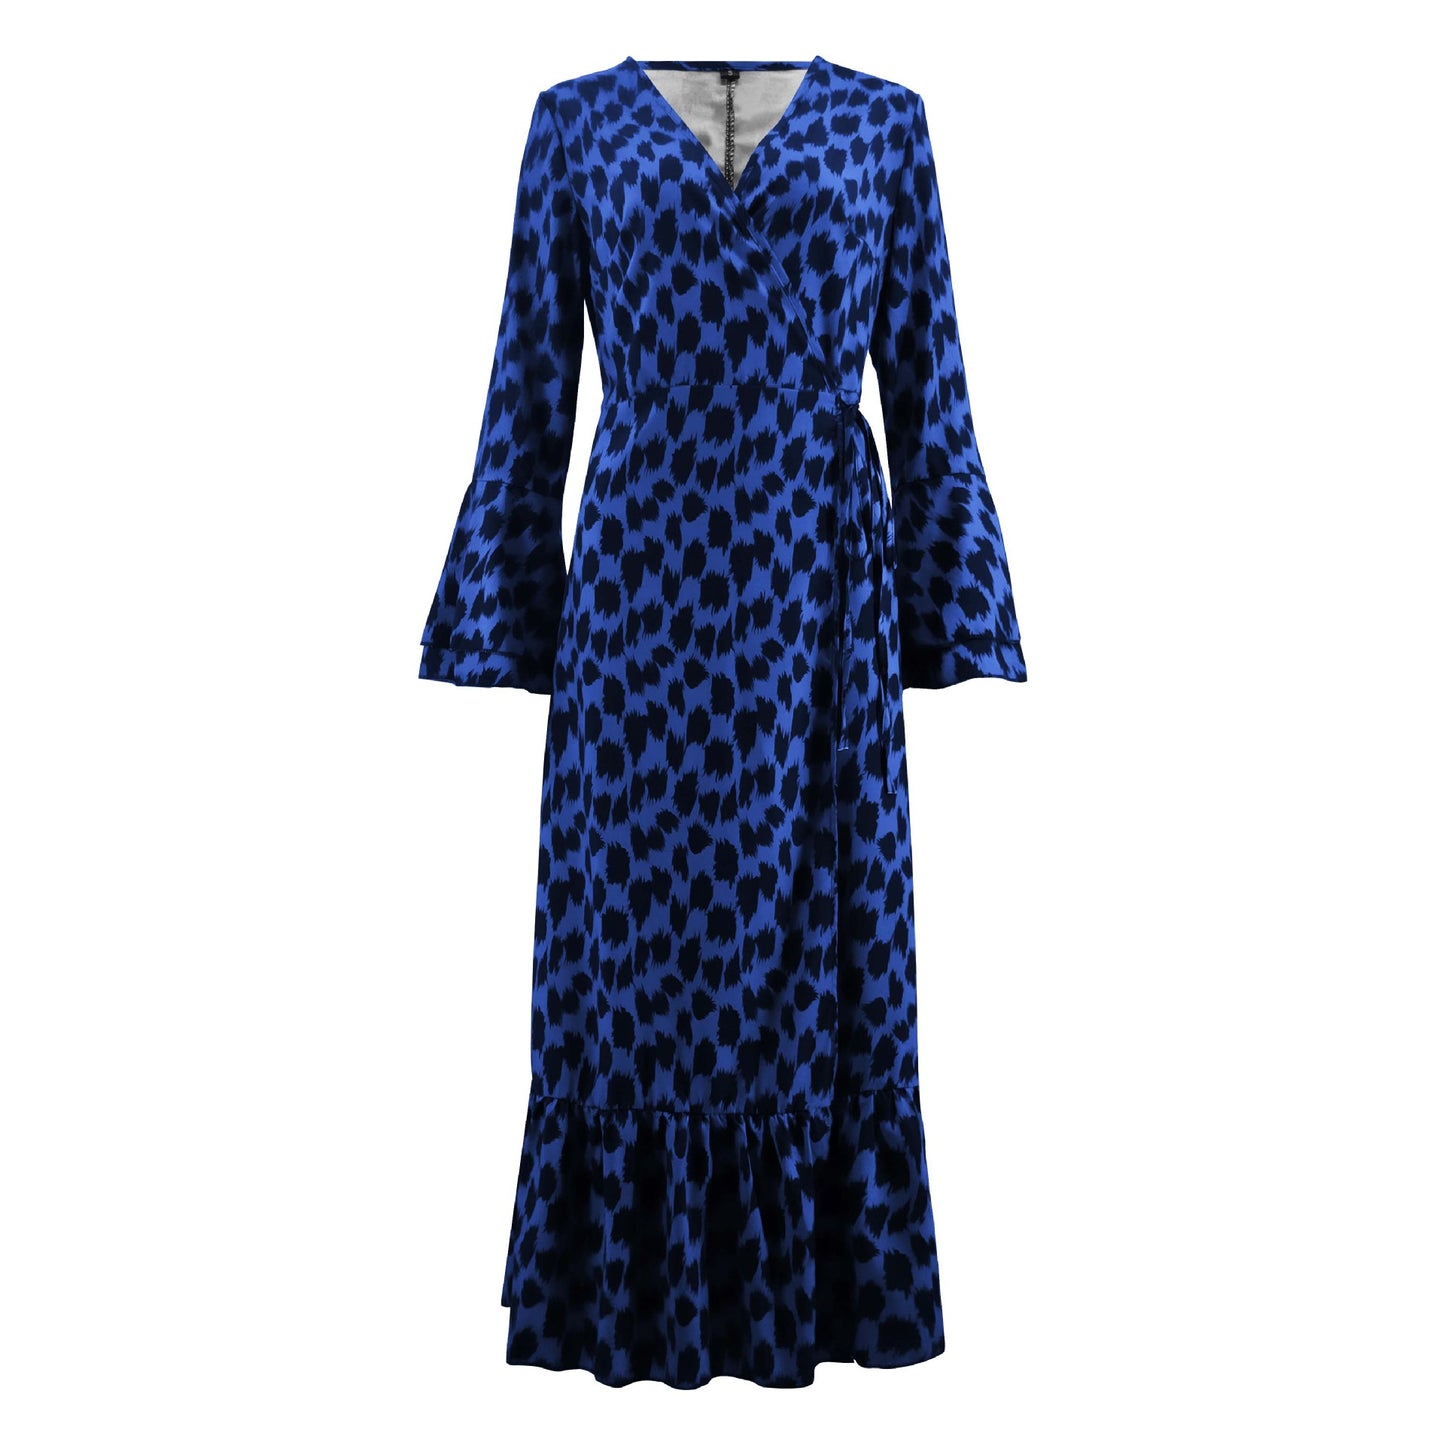 Leopard print maxi dress with flared sleeves